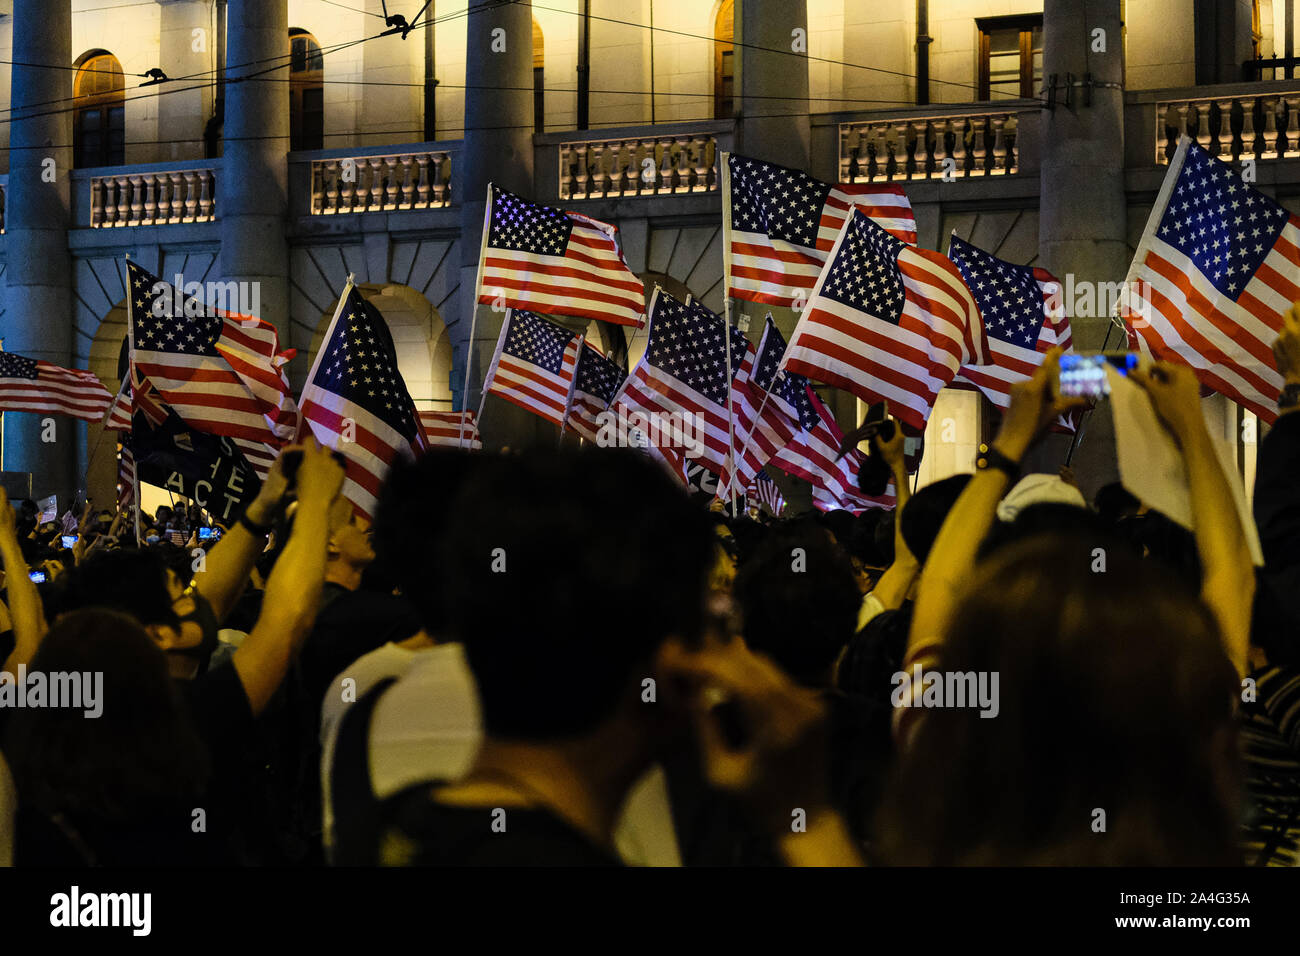 Hong Kong. 14th Oct, 2019. Protesters march with the flag of the United States attend Hong Kong Human Rights and Democracy Act Rally at Chater Garden in Central District Hong Kong. This rally was proposed to US lawmakers that they should pass the act that would help the Hong Kong democracy. Its aimed at putting pressure on Beijing to uphold its promise to preserve Hong Kongs autonomy. Credit: Keith Tsuji/ZUMA Wire/Alamy Live News Stock Photo